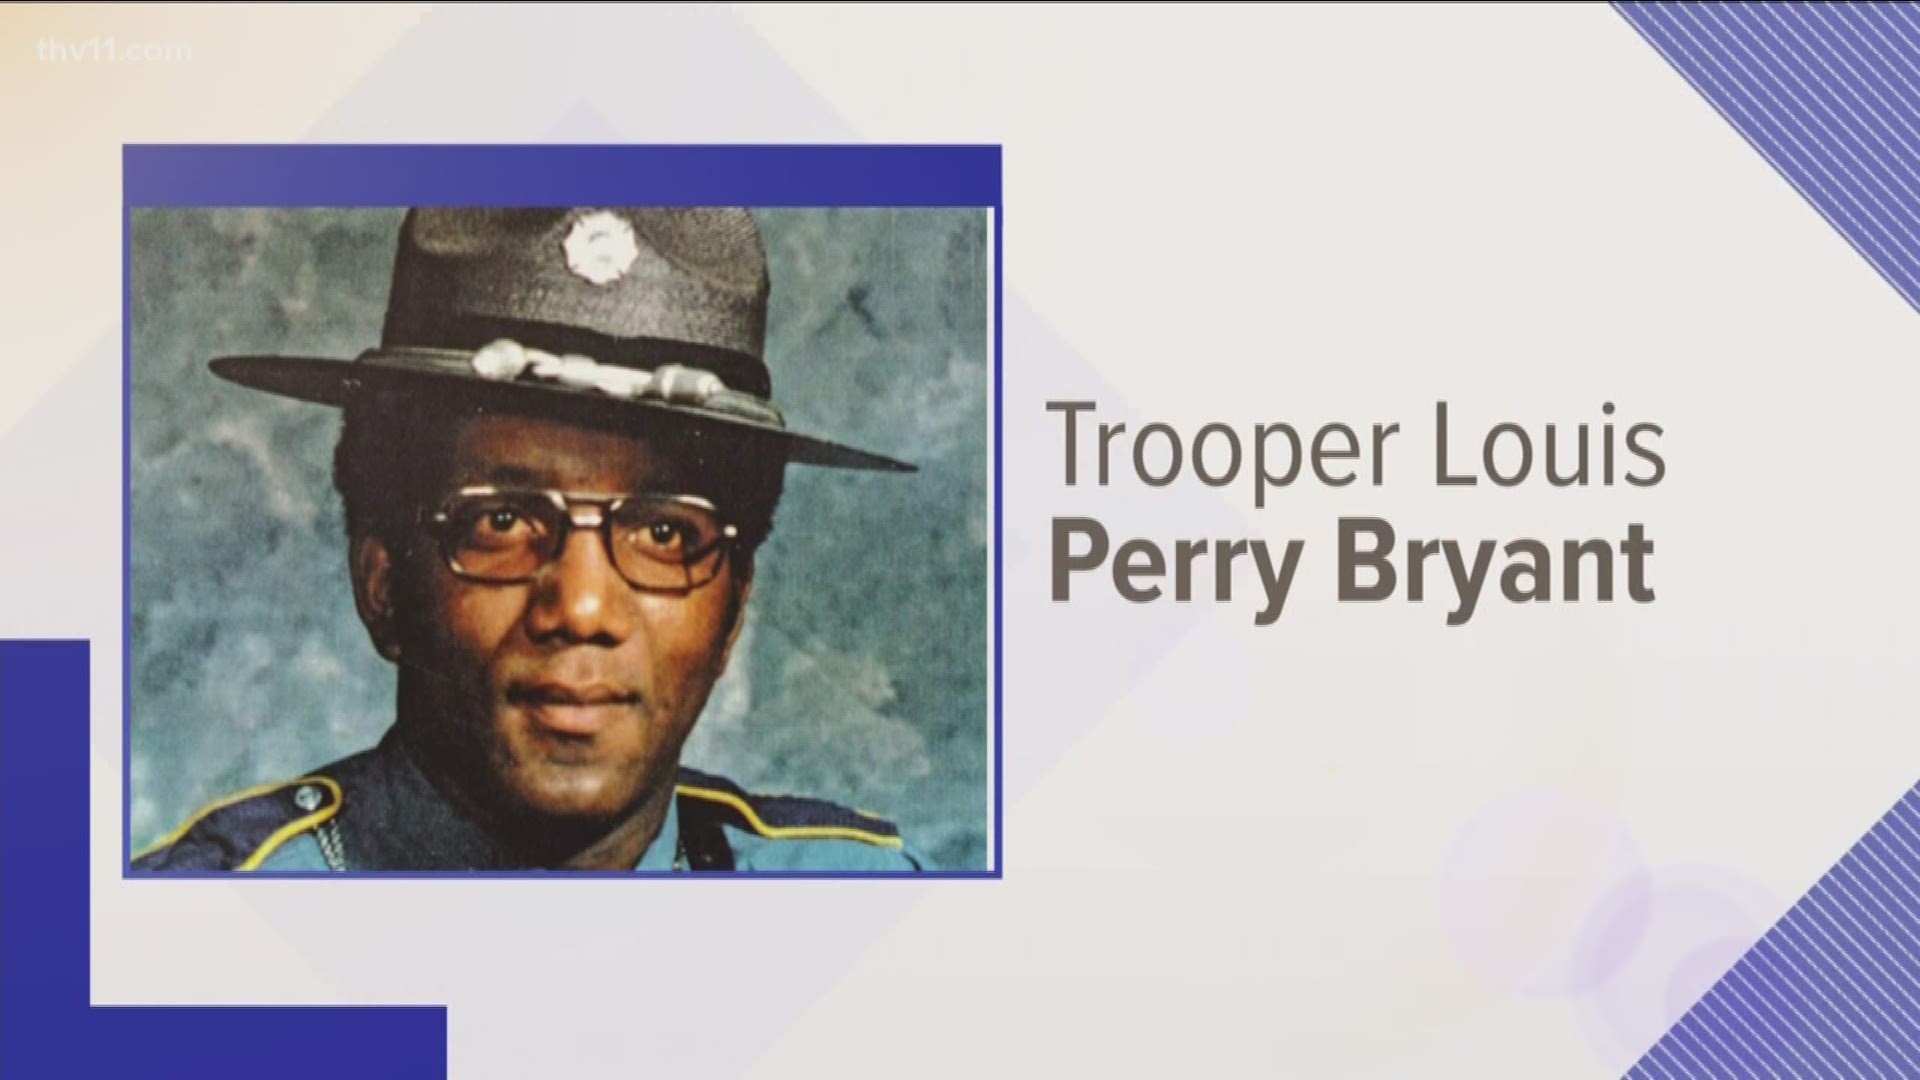 On June 30, 1984, white supremacist Richard Snell shot and killed Arkansas State Trooper Louis P. Bryant during a routine traffic stop.